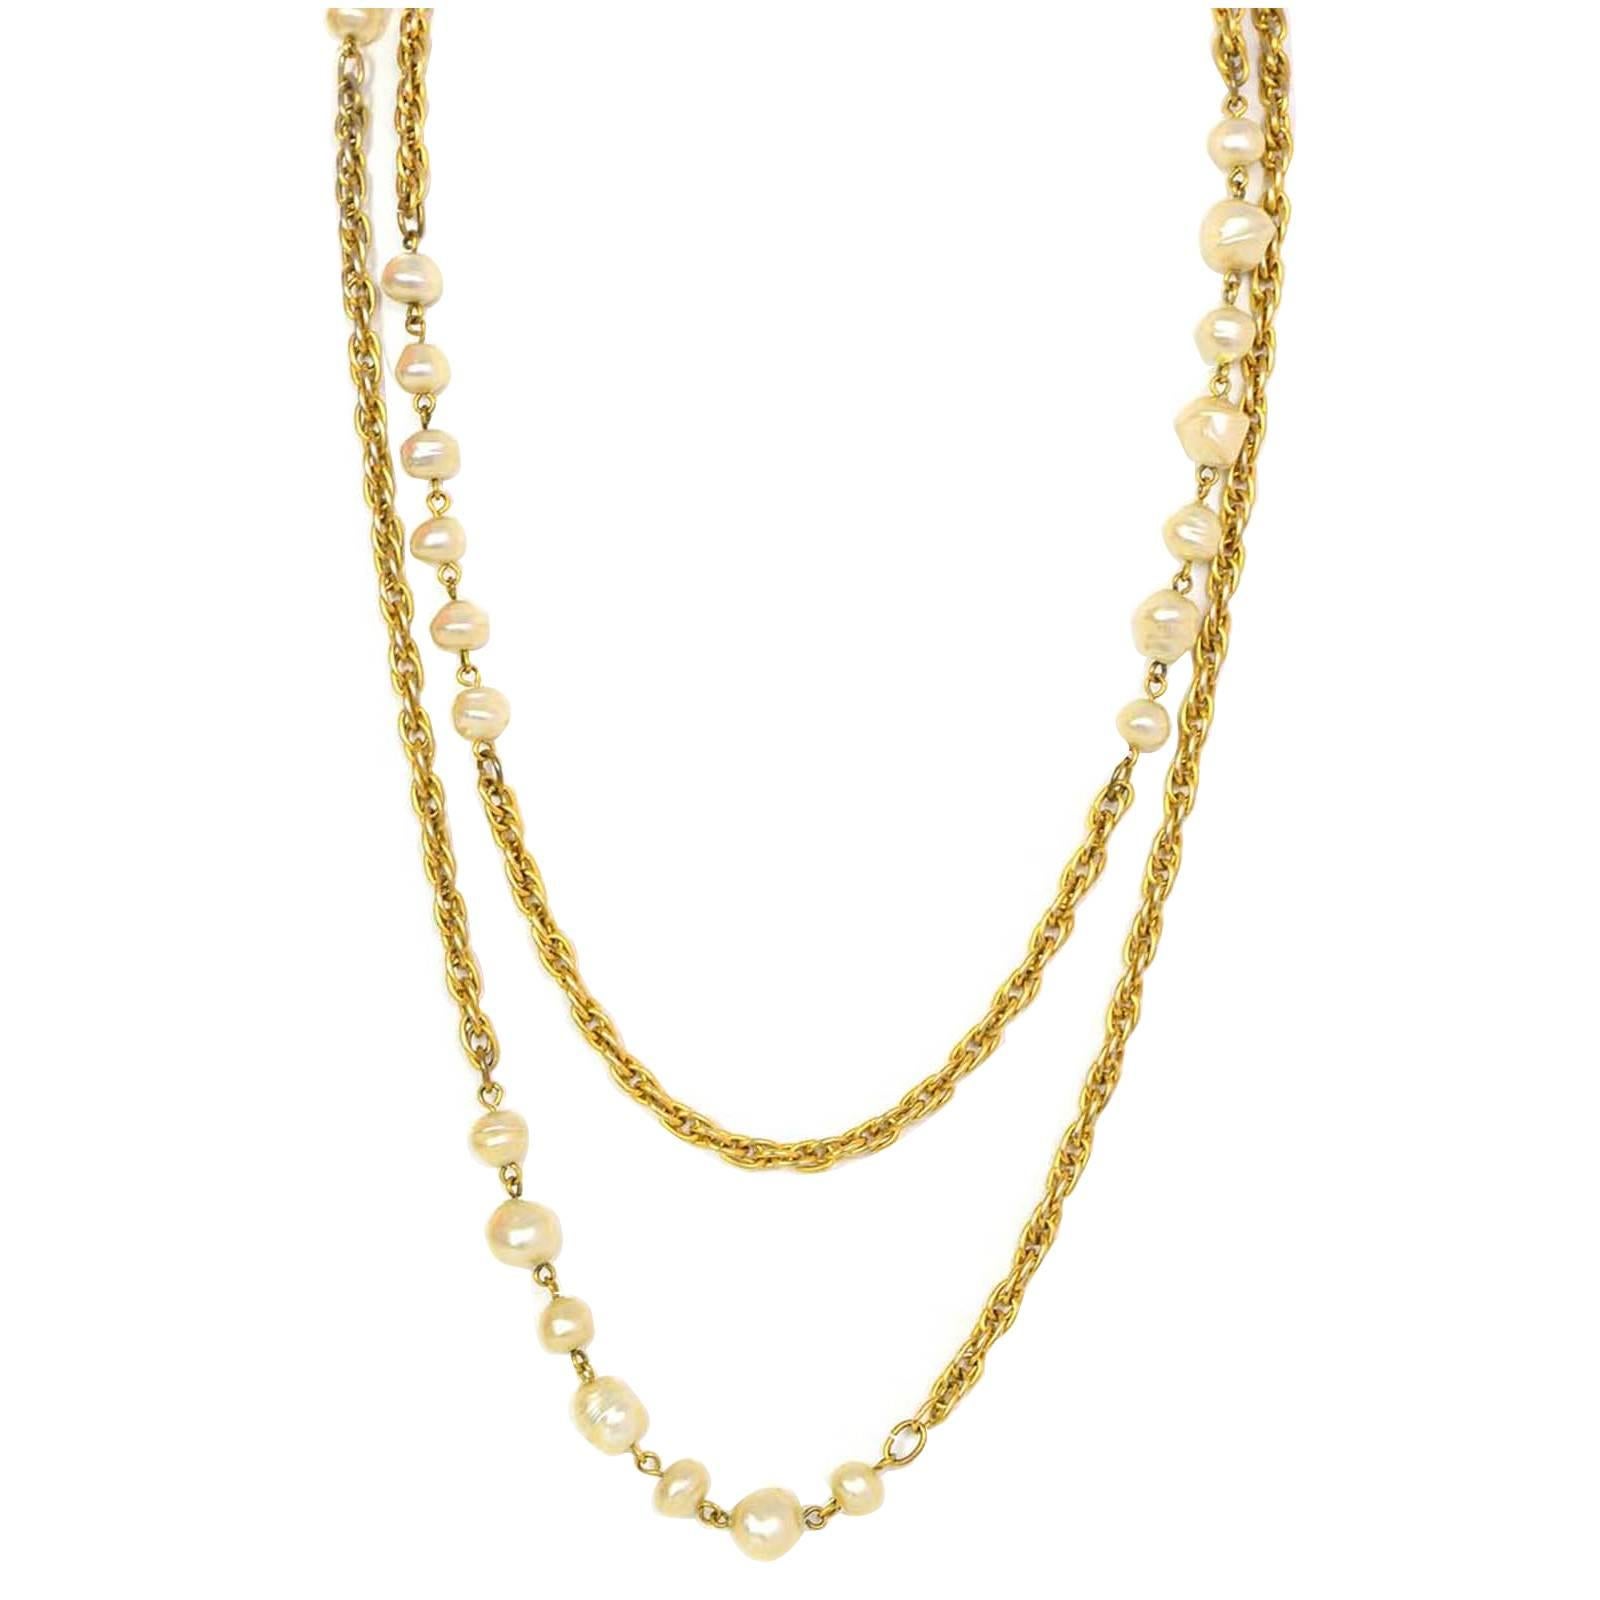 Chanel Vintage Goldtone and Faux Pearl Long Necklace